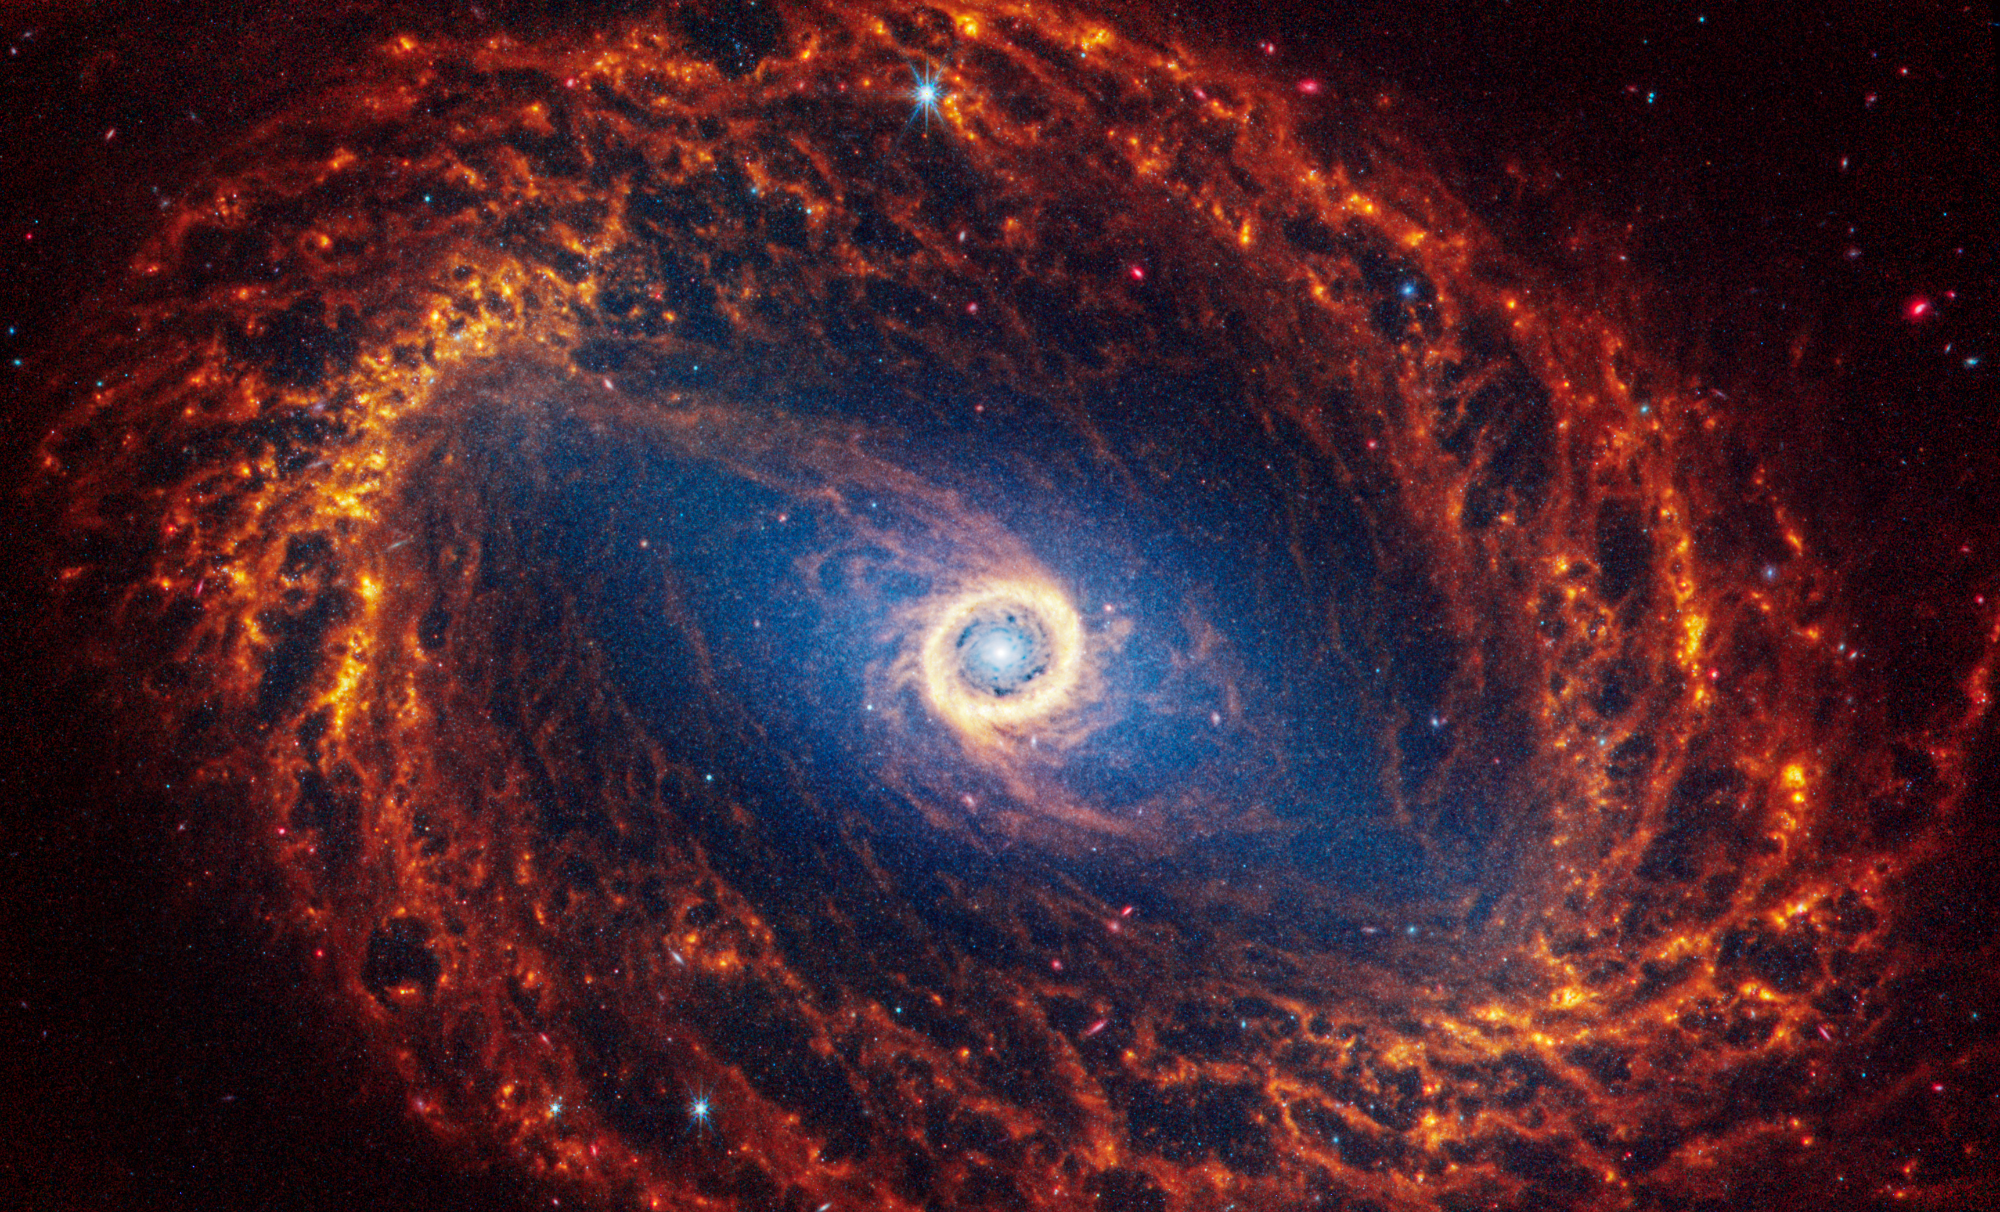 Webb’s image of NGC 1512 shows a face-on barred spiral galaxy anchored by its central region, which is circular and shows a bright white point at the center with blue and yellow circles around it. Outside the core is a large bar structure filled with a haze of blue stars, forming a rough parallelogram shape and taking up about a quarter of the area. The bar is crossed by orange filaments made of stars, gas, and dust that extend diagonally to the top left and bottom right. Outside this, the thick orange spiral arms form a rough oval, and within them there are smaller oval areas that appear black. The spiral arms are largely orange, ranging from dark to bright orange and extend beyond the edges of the image. There are many larger blue stars and slightly larger pink points of light spread throughout. Two larger foreground stars with at least six diffraction spikes are at top center and bottom center.